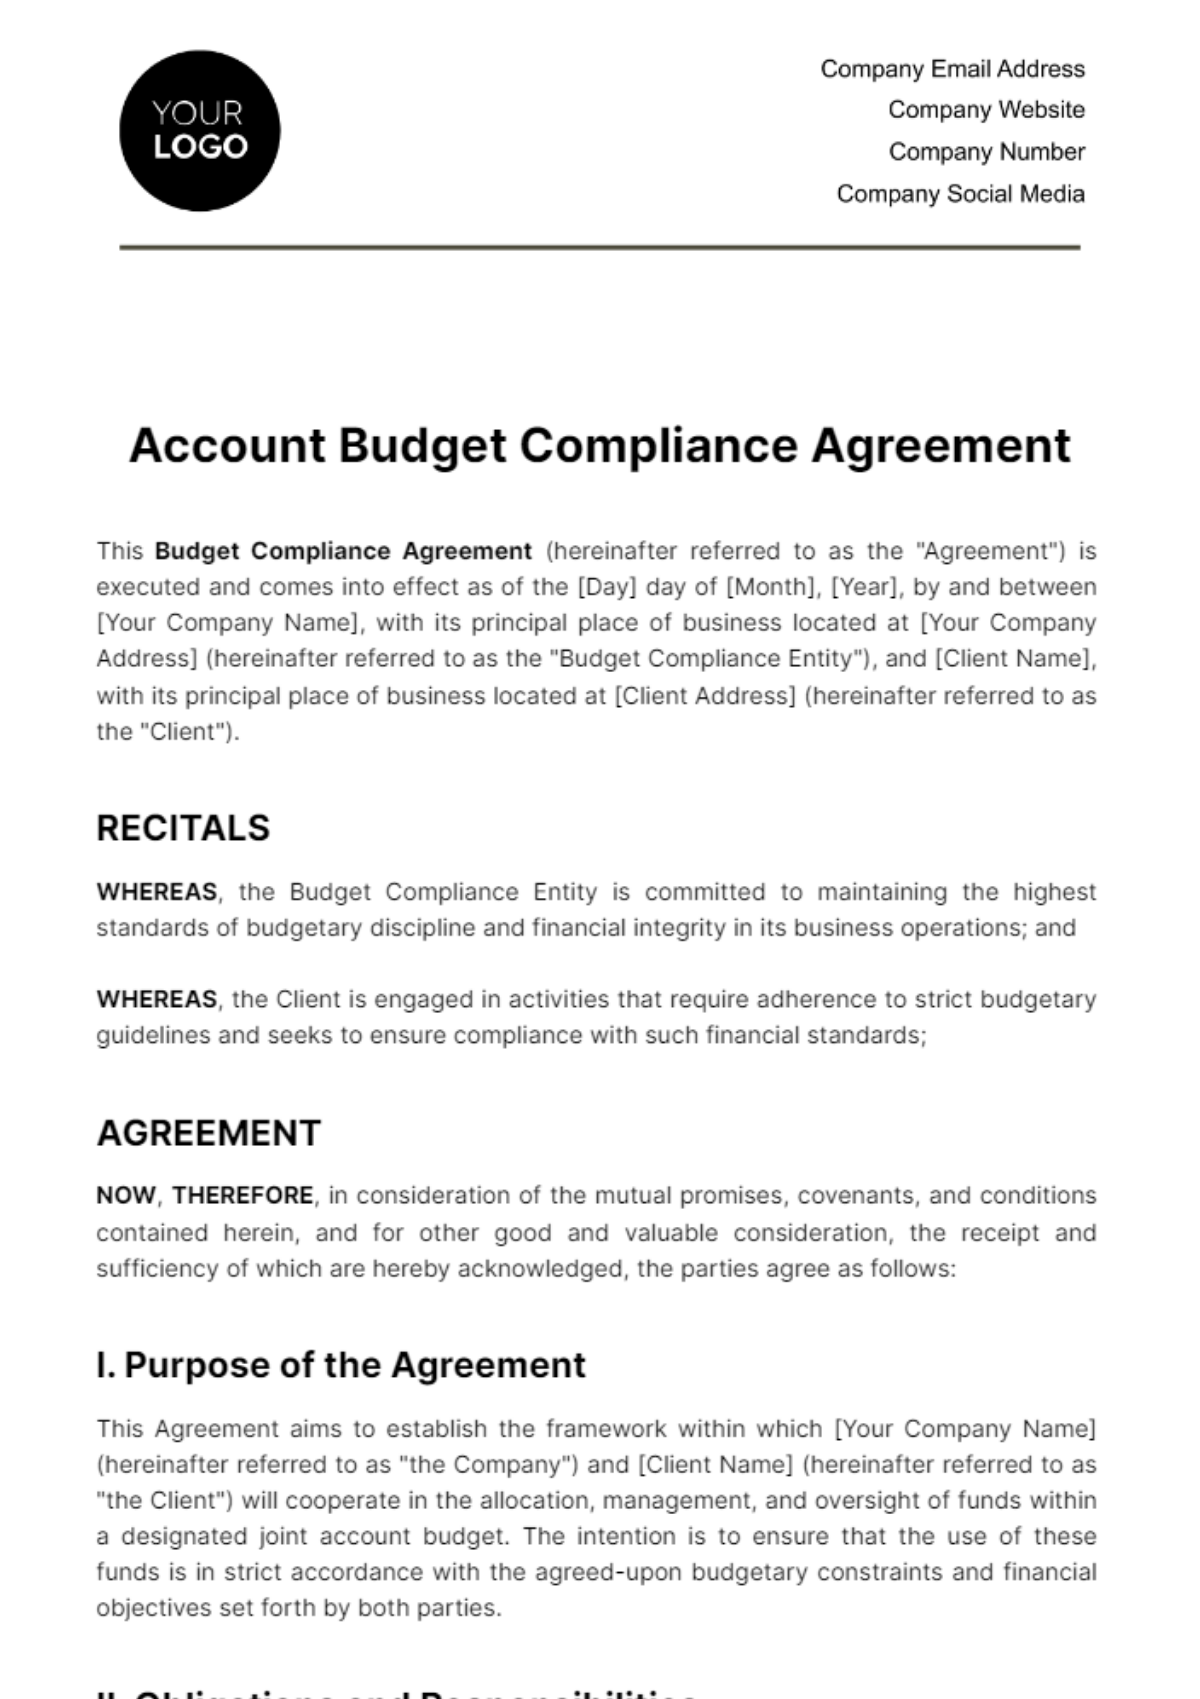 Free Account Budget Compliance Agreement Template